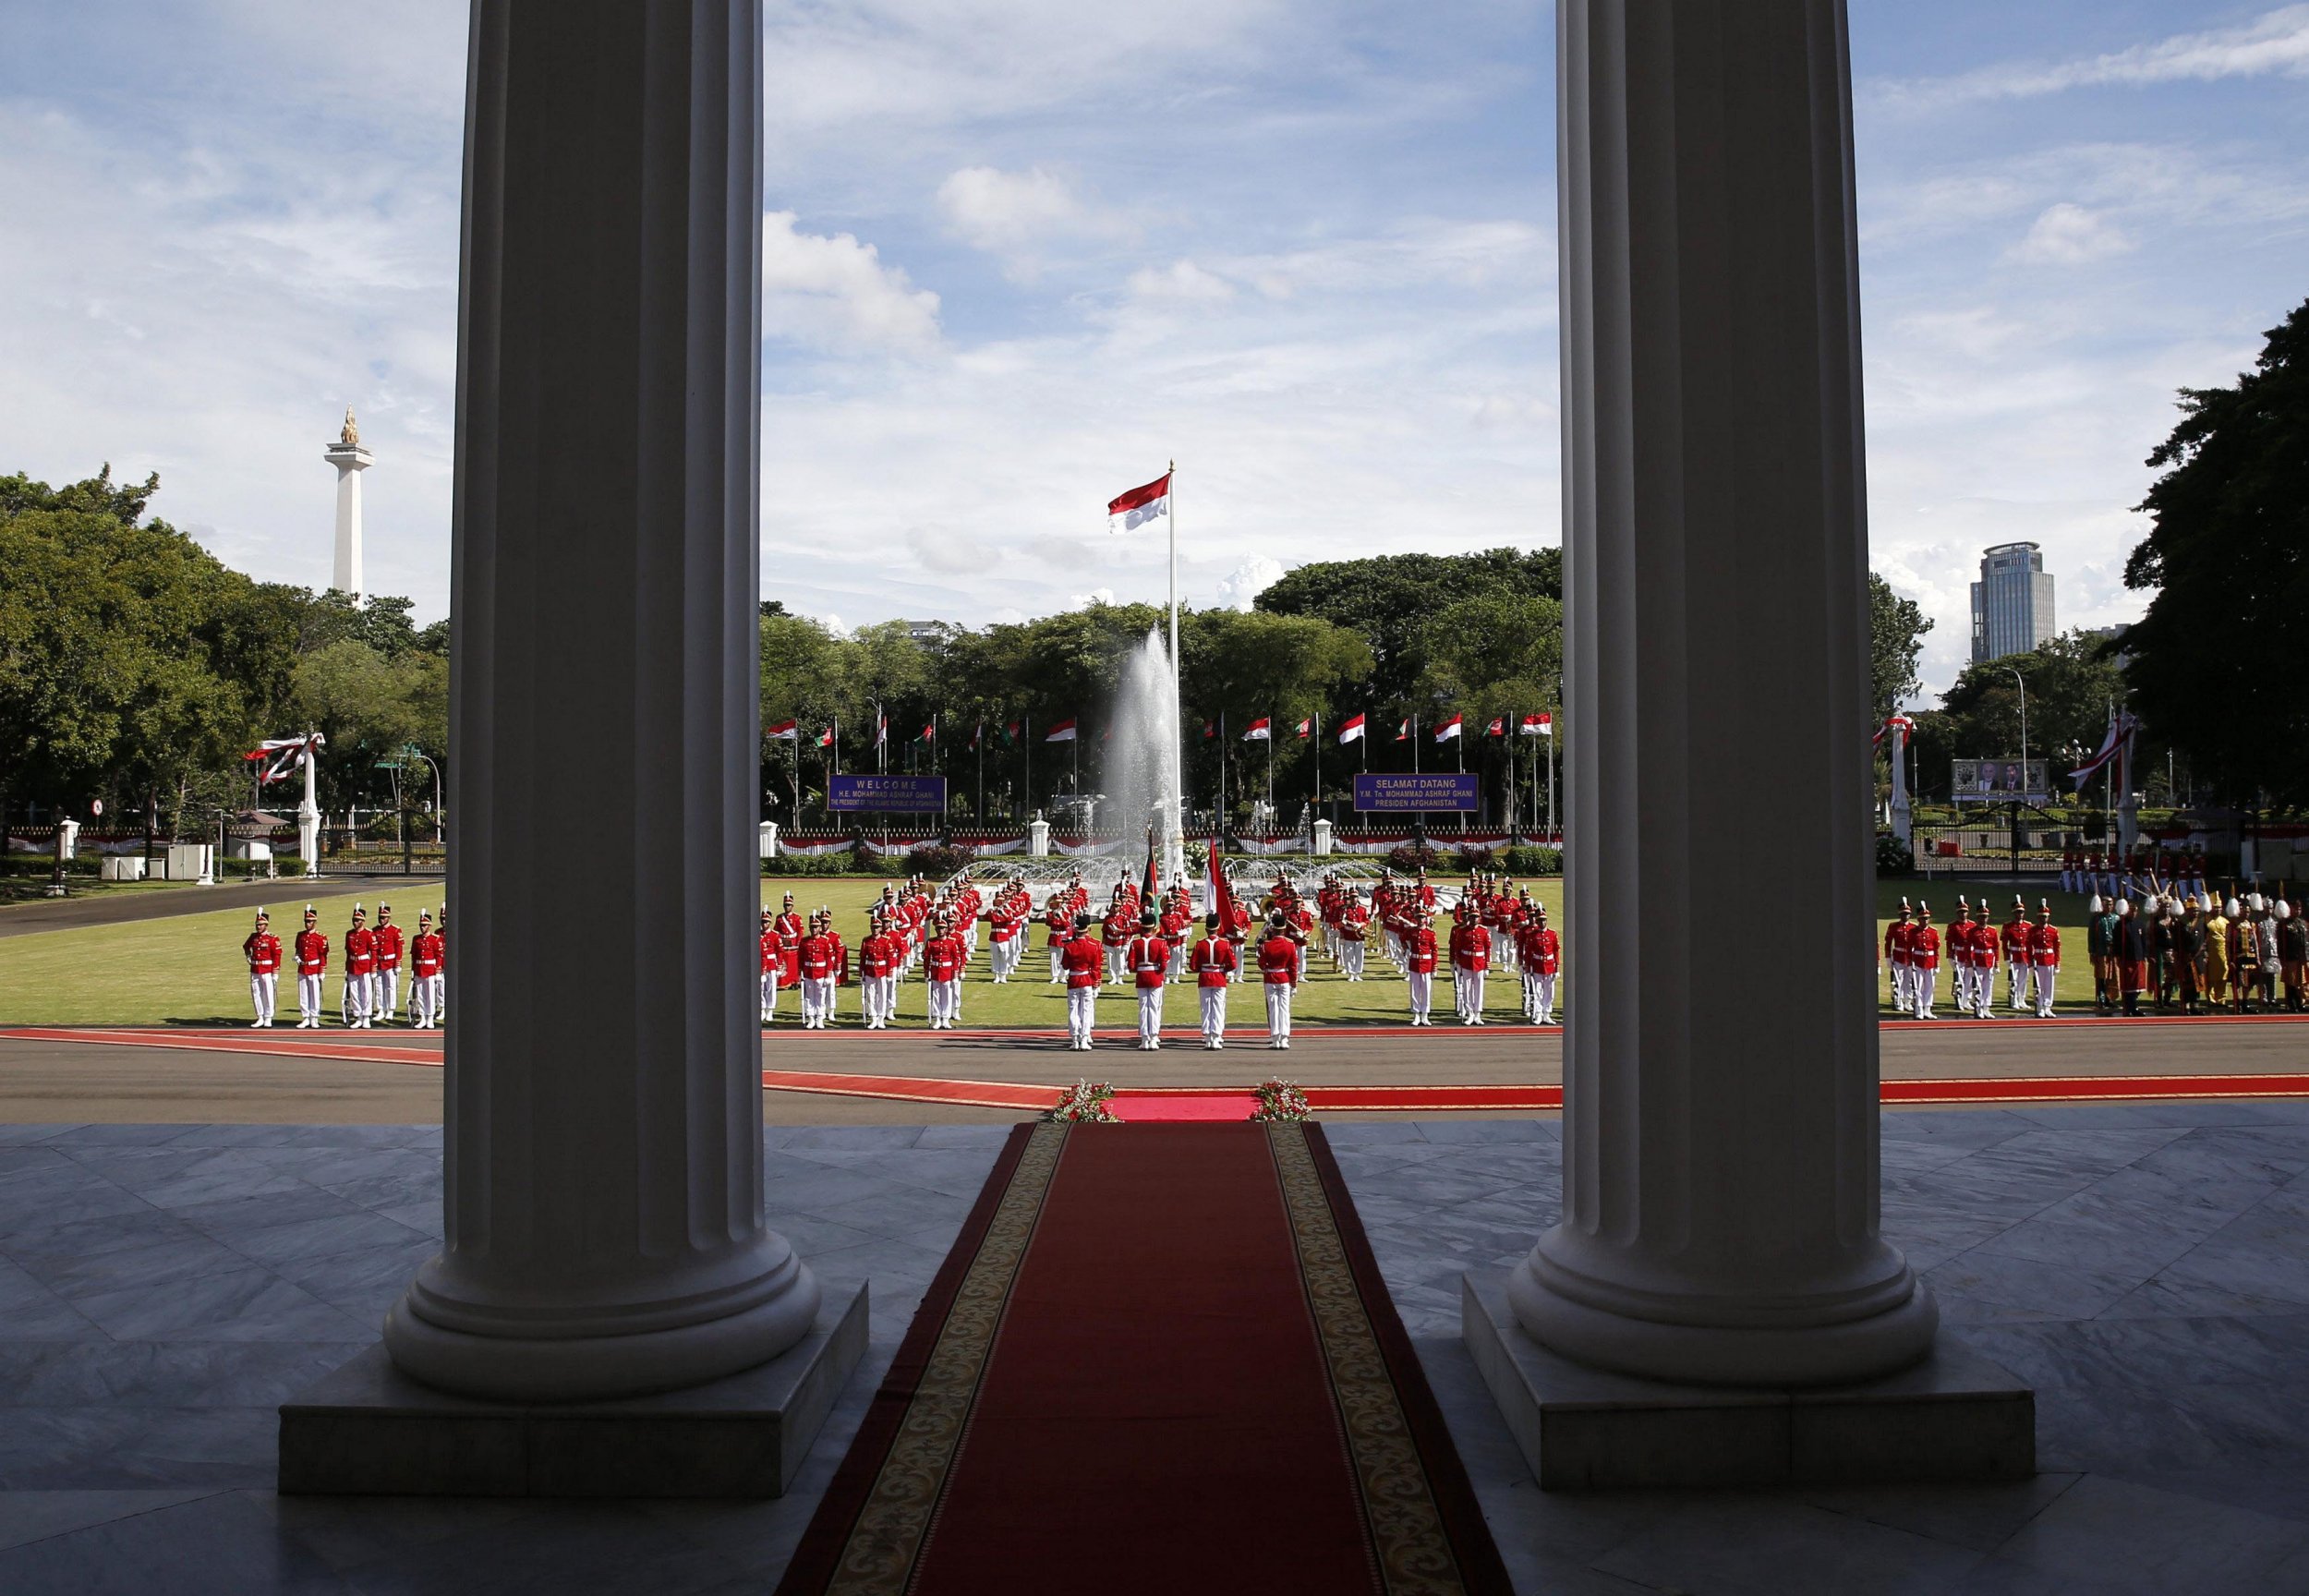 Indonesia's presidential palace